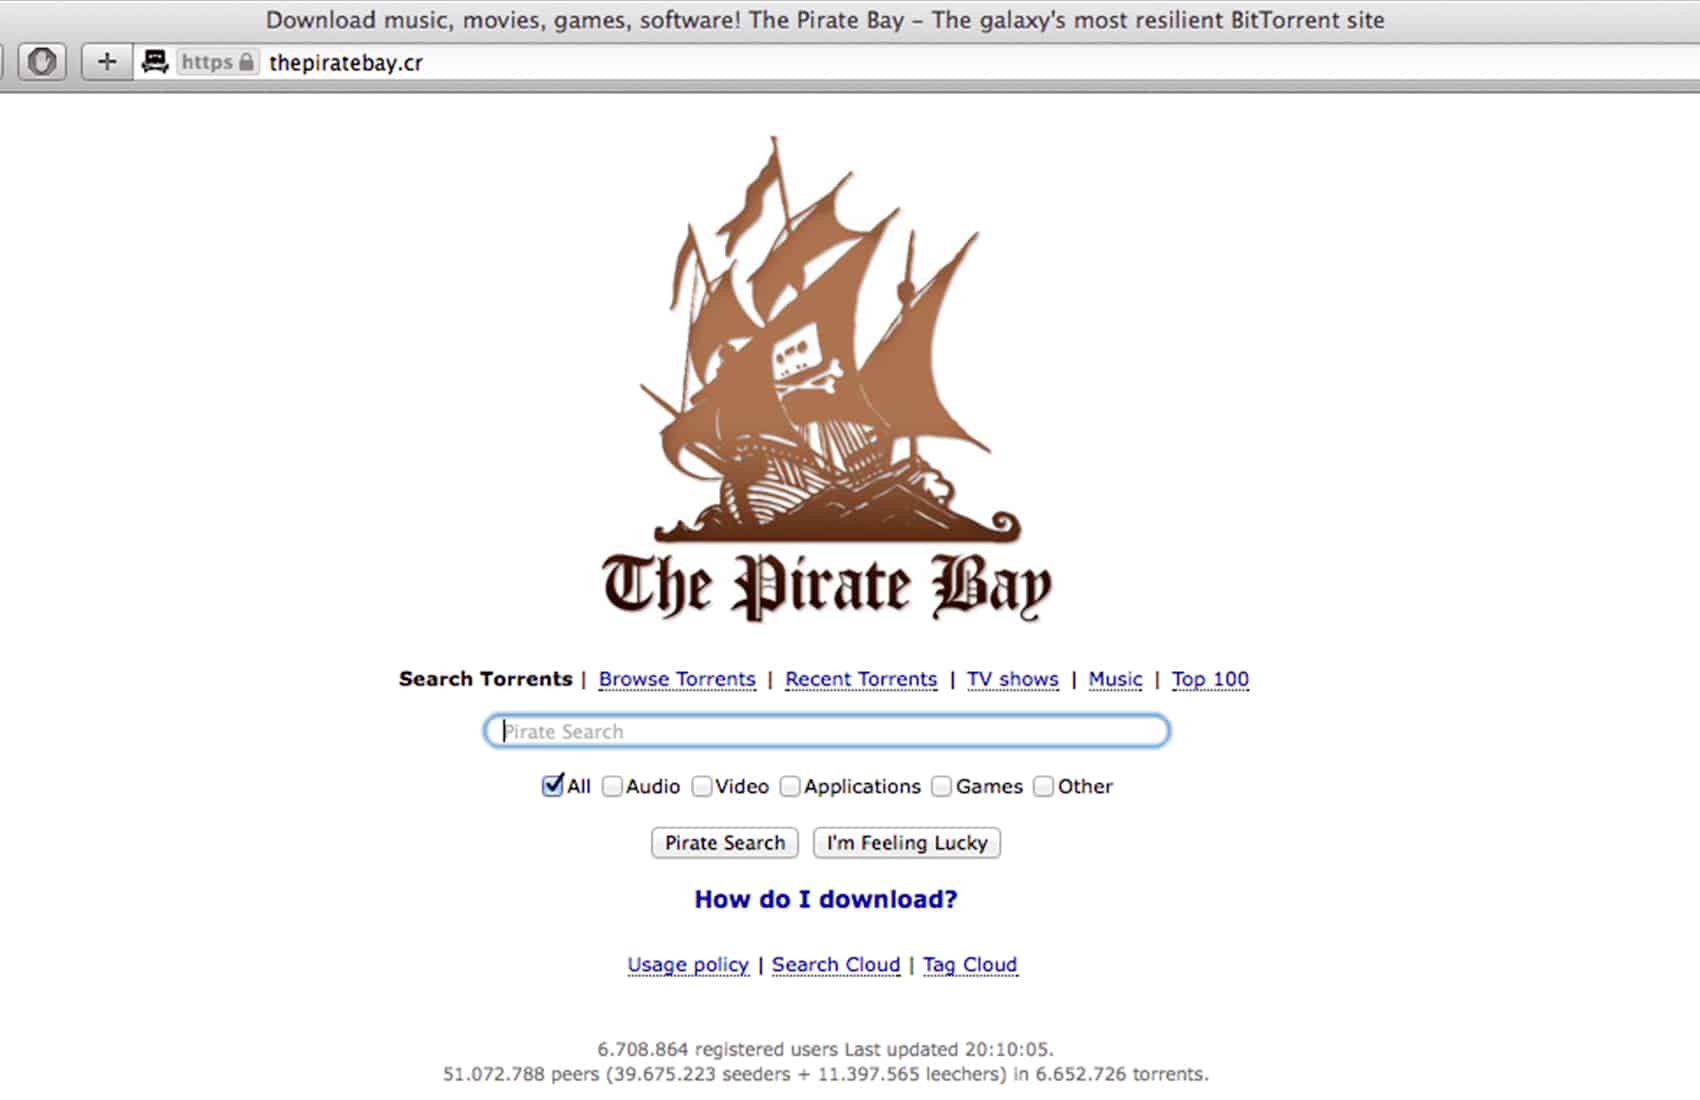 File-sharing site The Pirate Bay reappears on Costa Rica ...